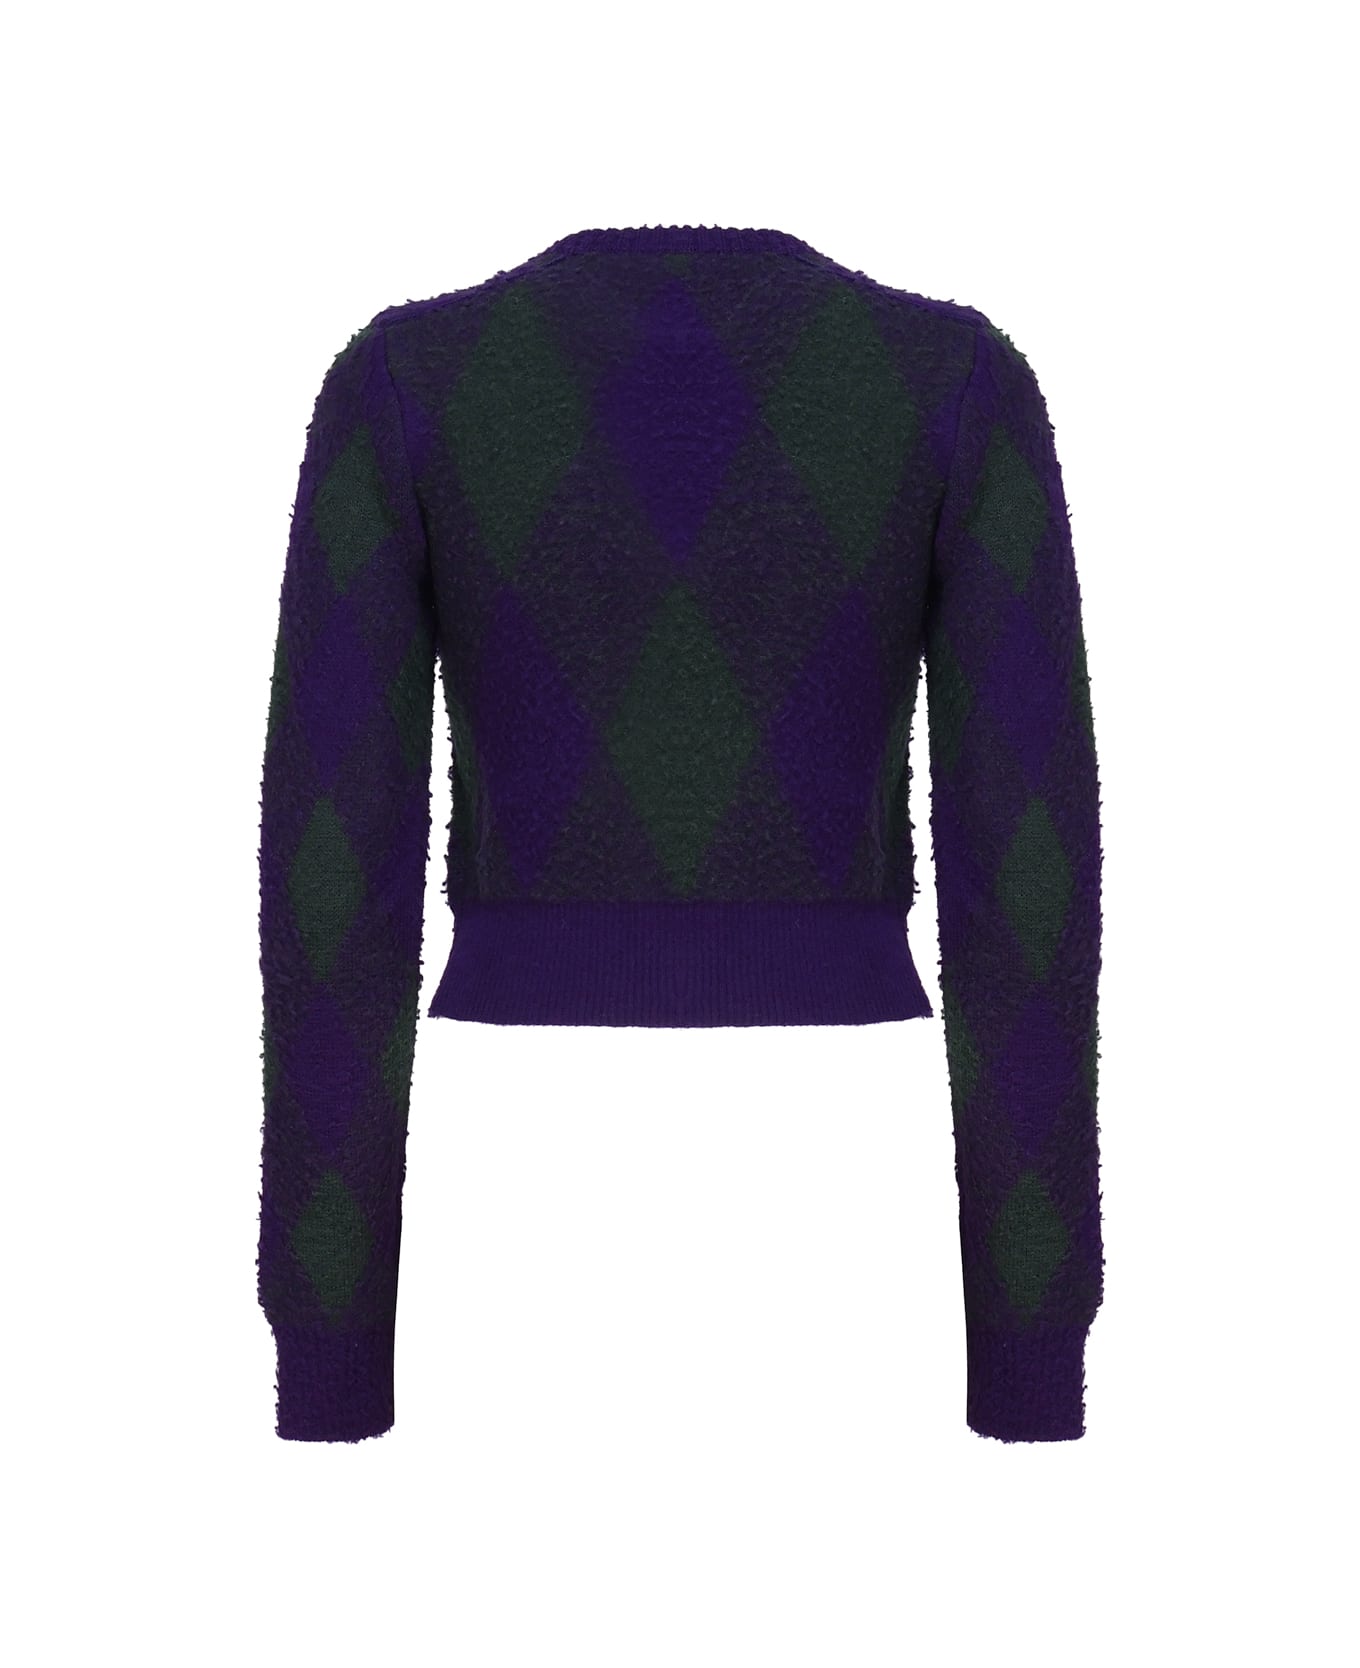 Burberry Cropped Sweater In Argyle Wool - Royal ニットウェア